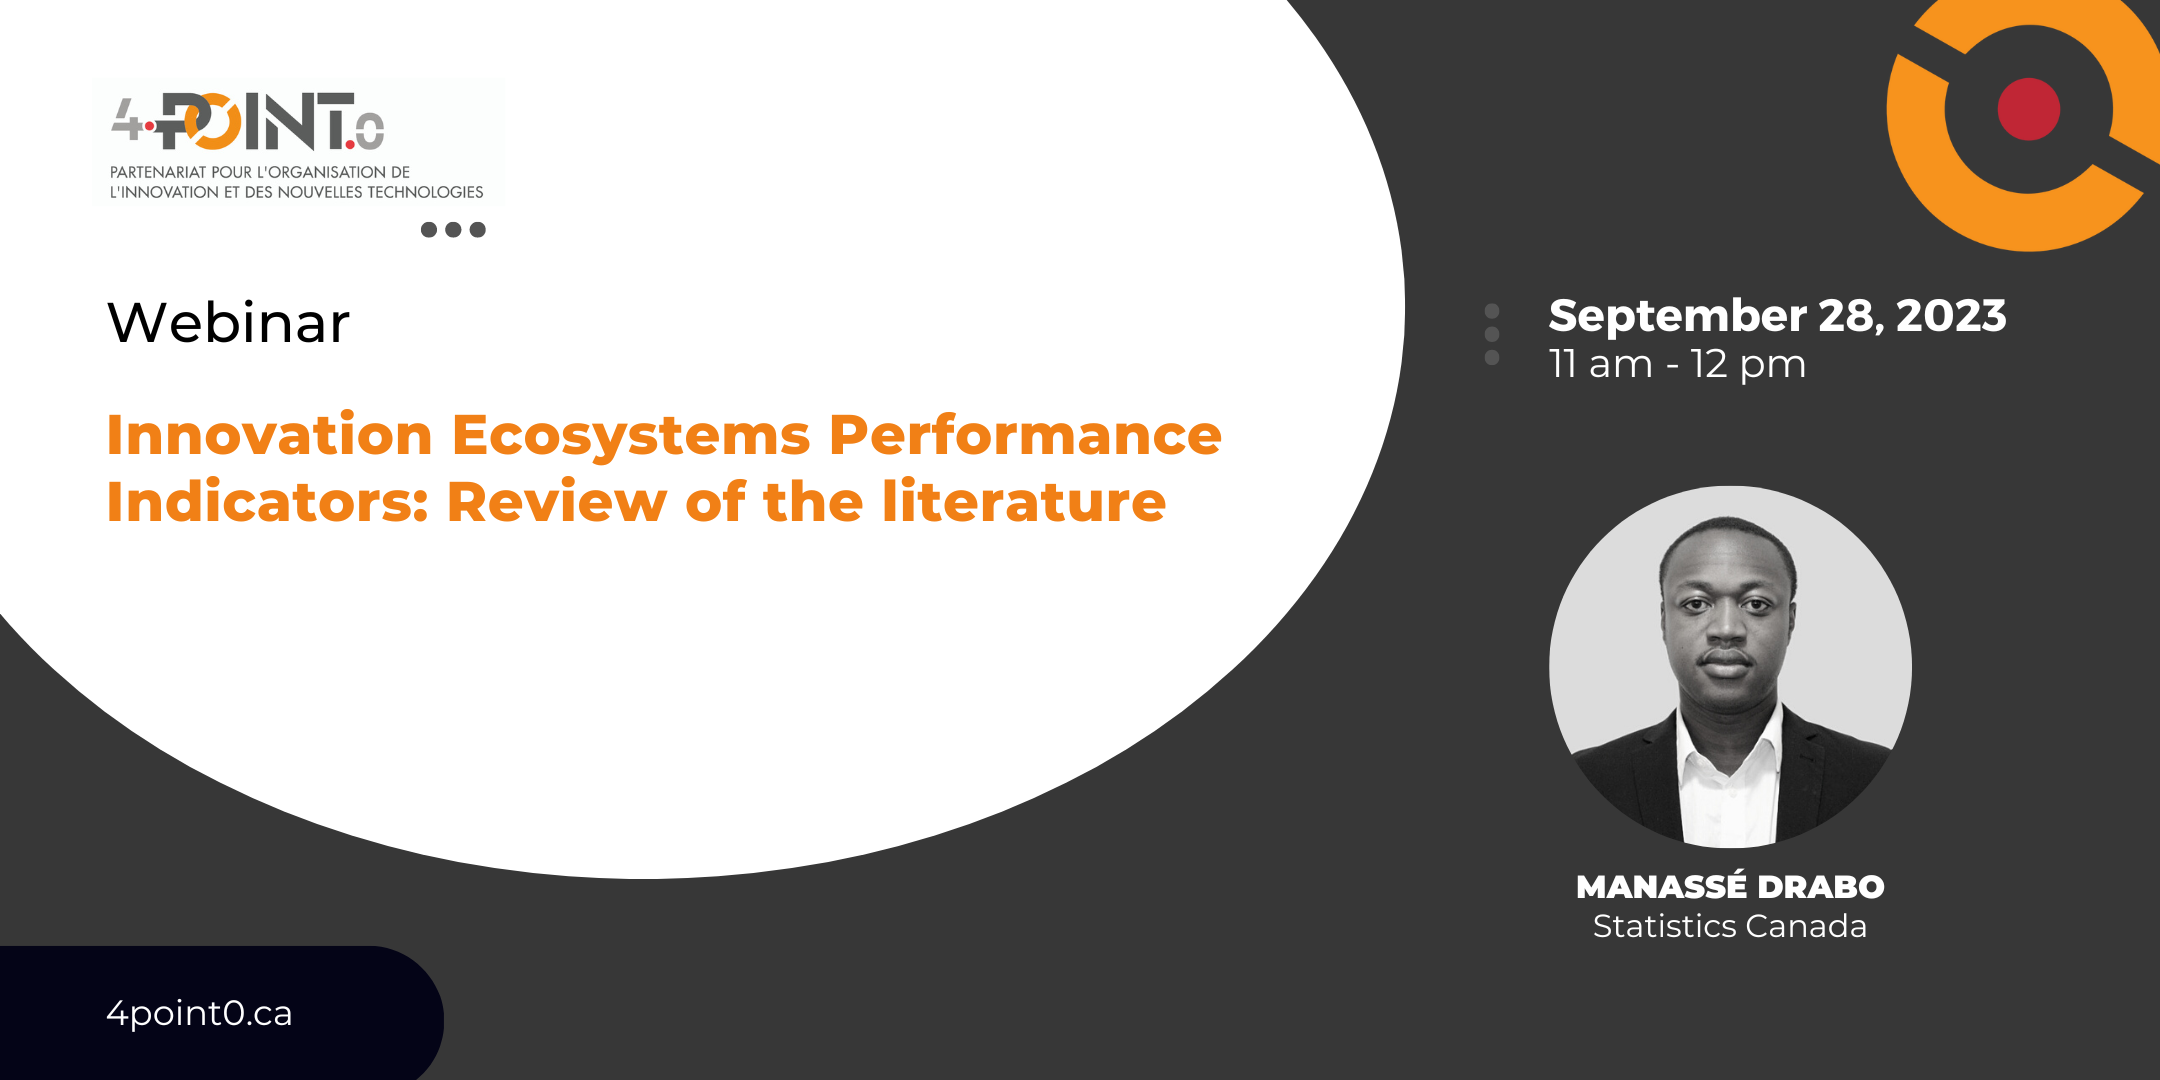 Innovation Ecosystems Performance Indicators: Review of the literature - Webinar with Manassé Drabo